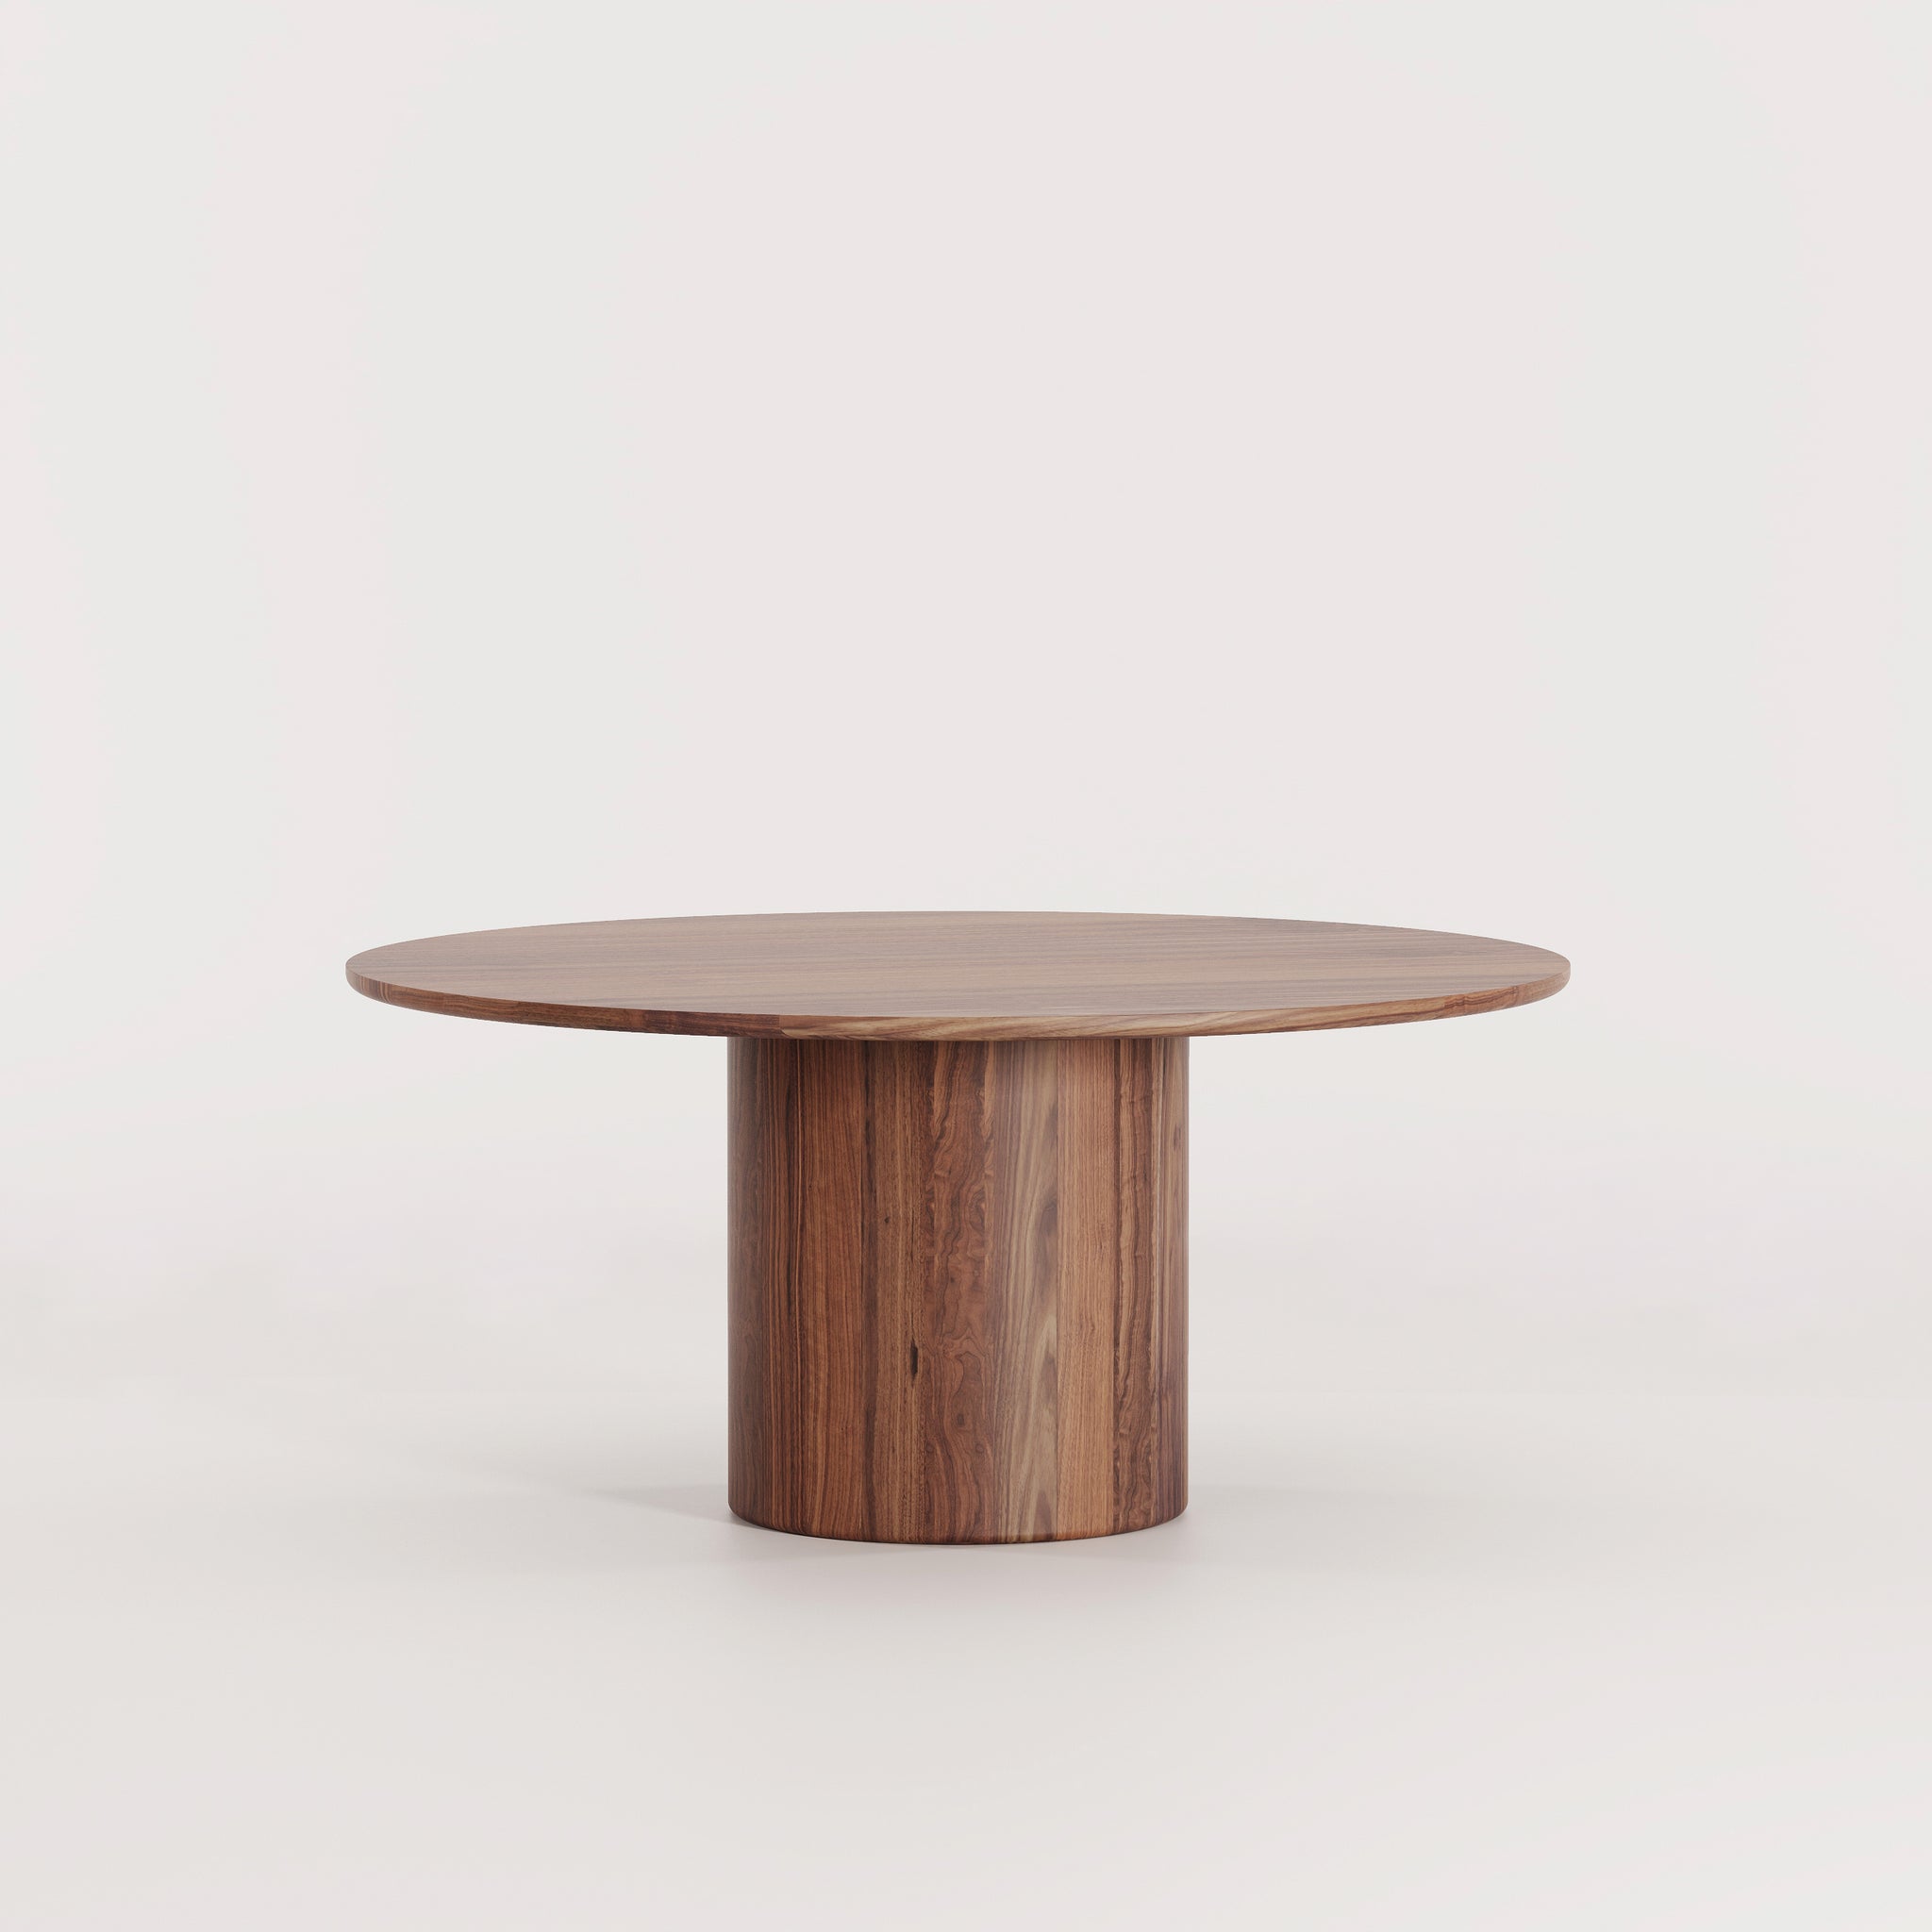 Border table by Mast Furniture. Modern dining table made in Australia. 